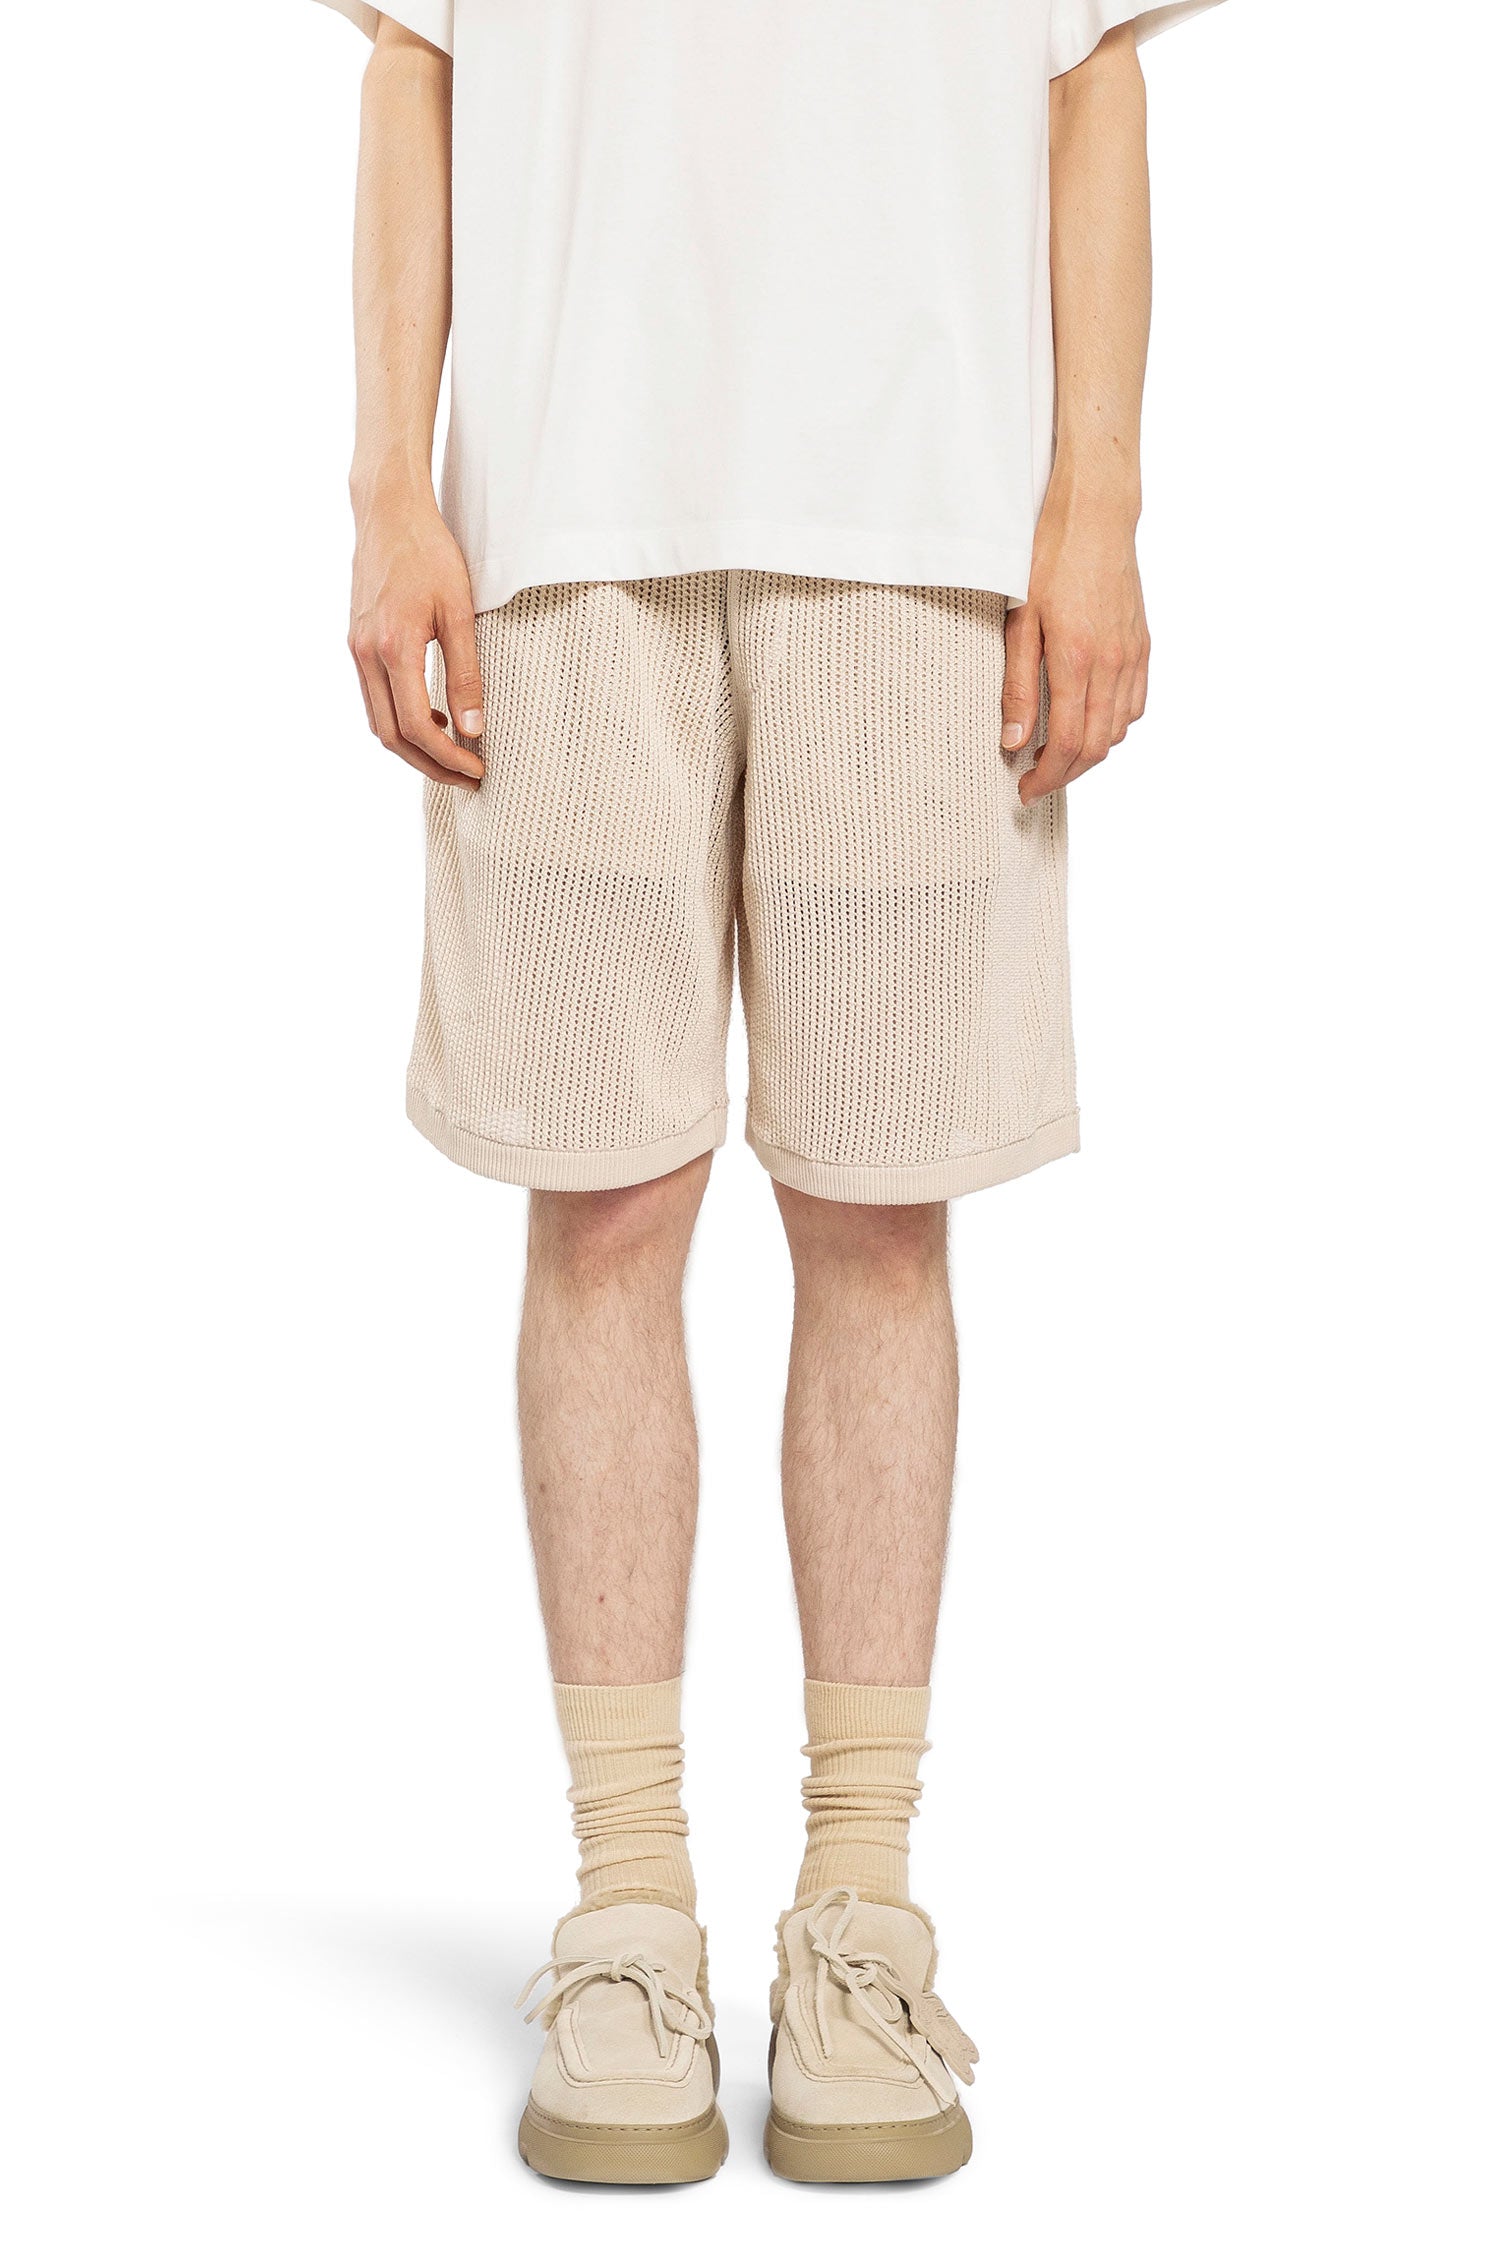 BURBERRY MAN OFF-WHITE SHORTS & SKIRTS